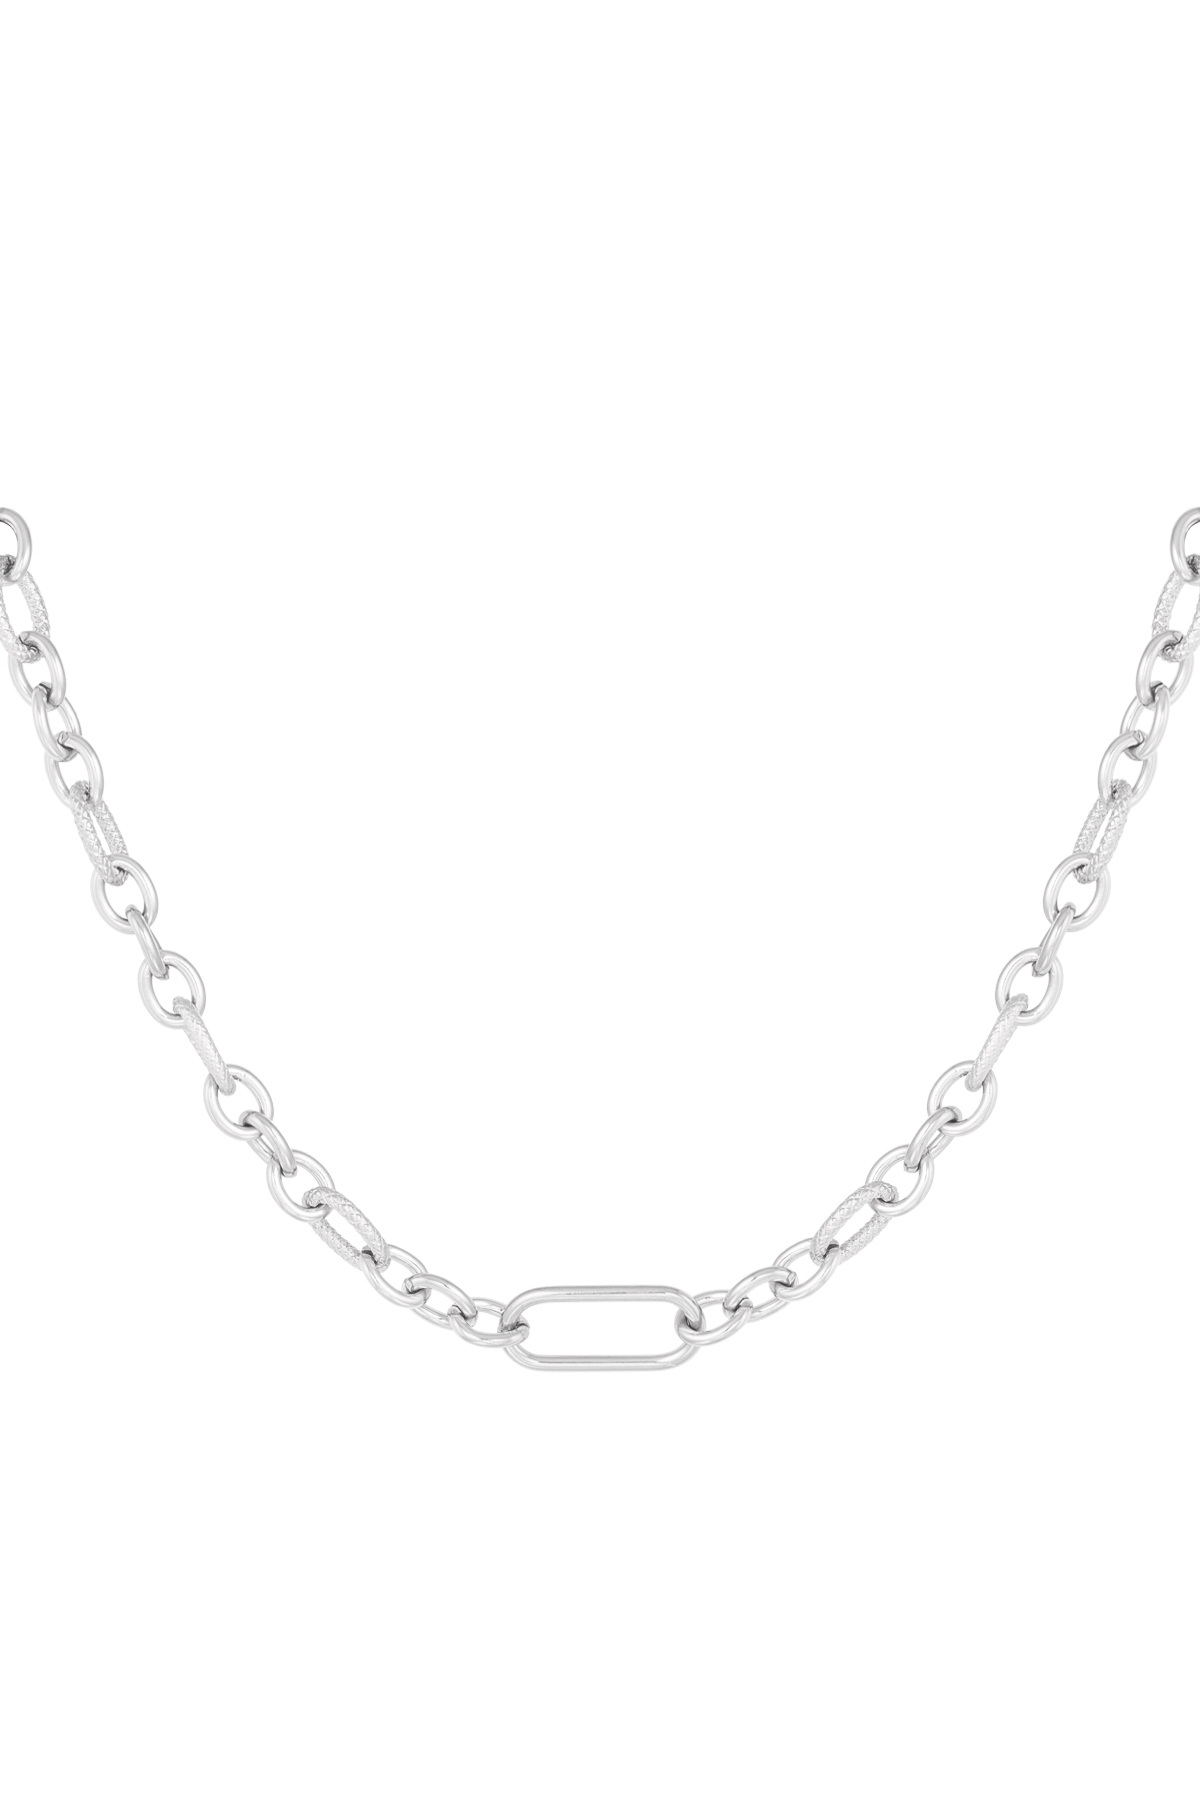 Necklace different links - silver